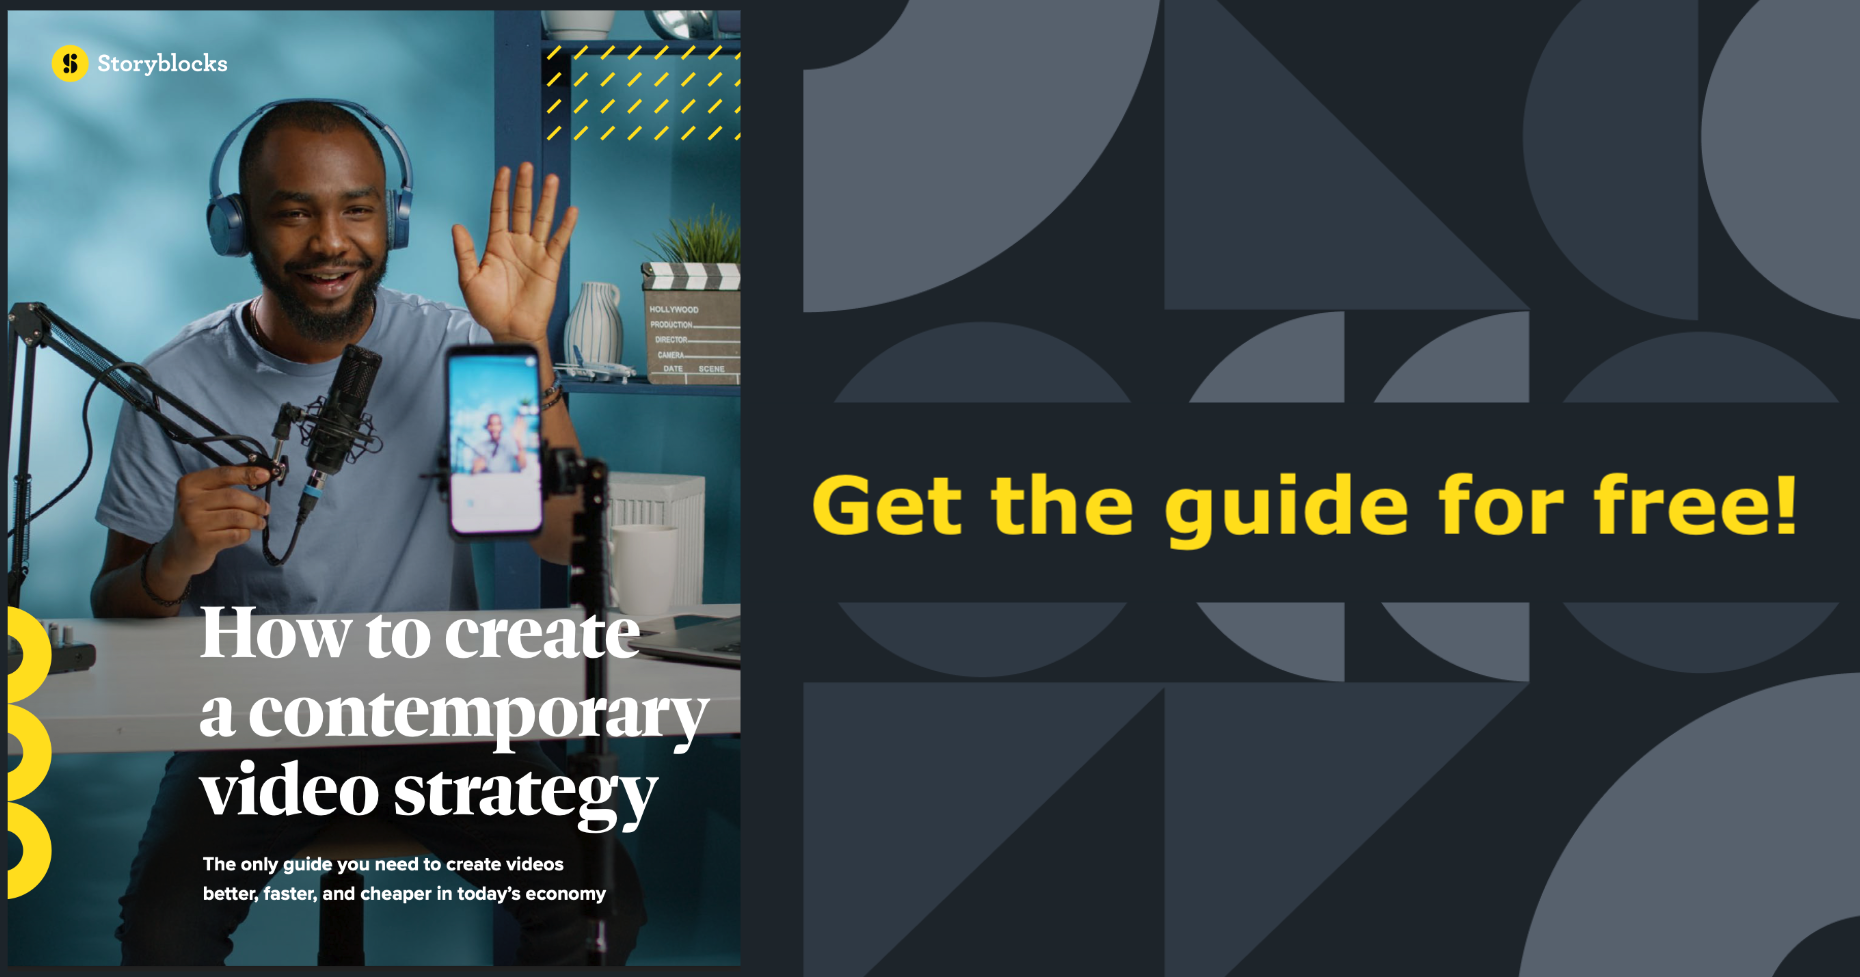 Click to download the guide for free. Cover art for "How to create a contemporary video strategy: The only guide you need to create videos better, faster, and cheaper in today's economy."